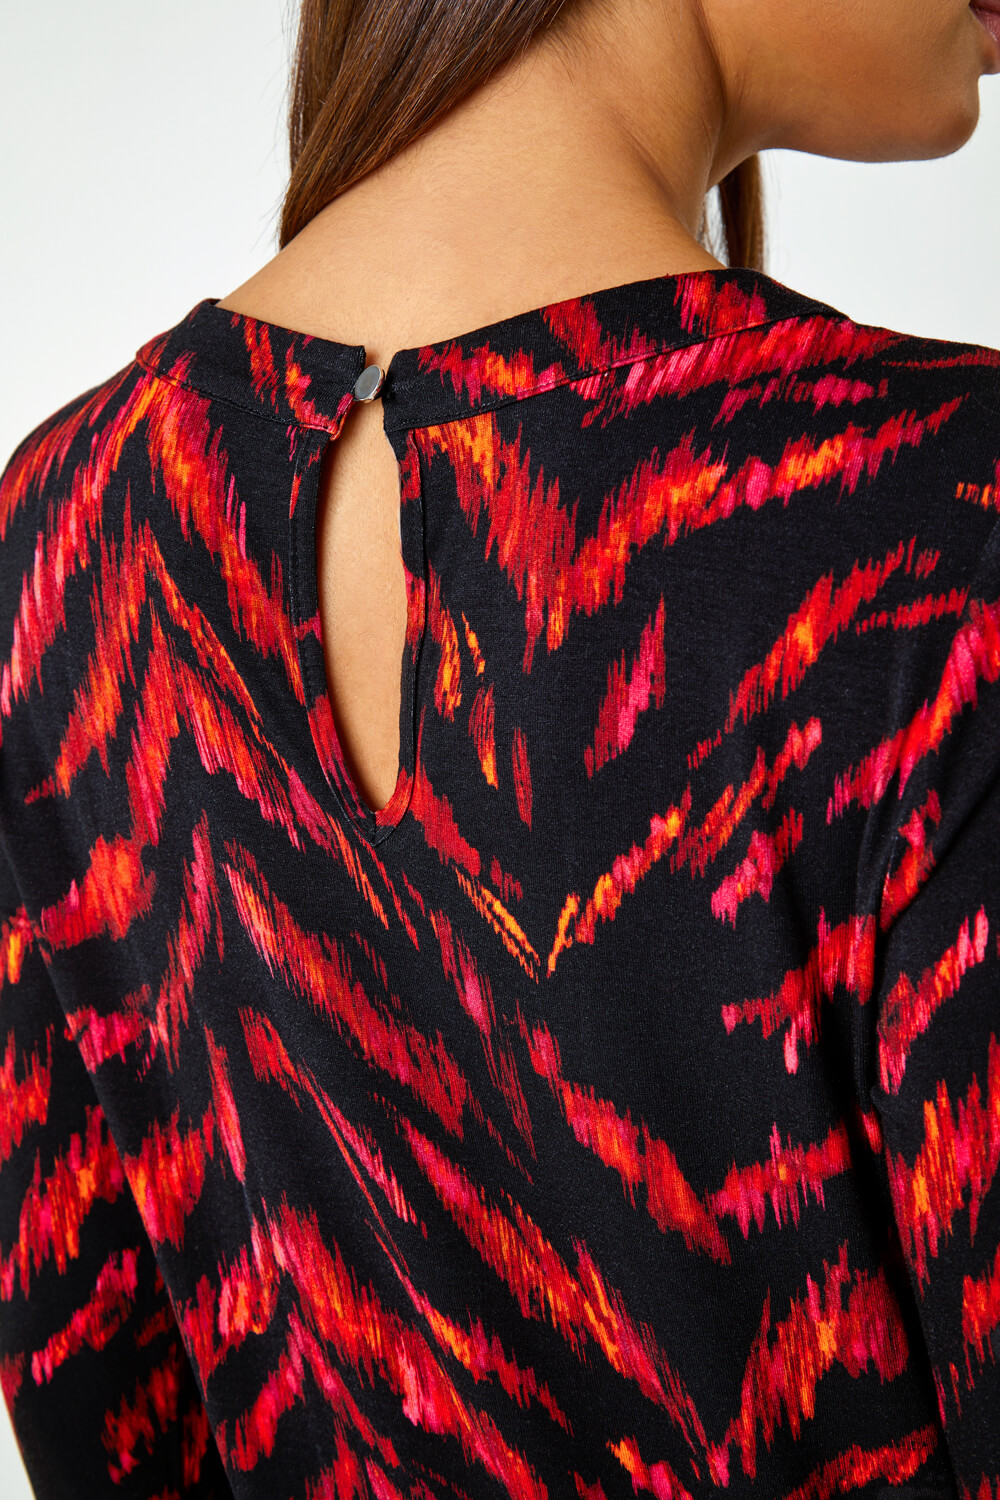 Red Animal Print Tunic Stretch Top, Image 5 of 5